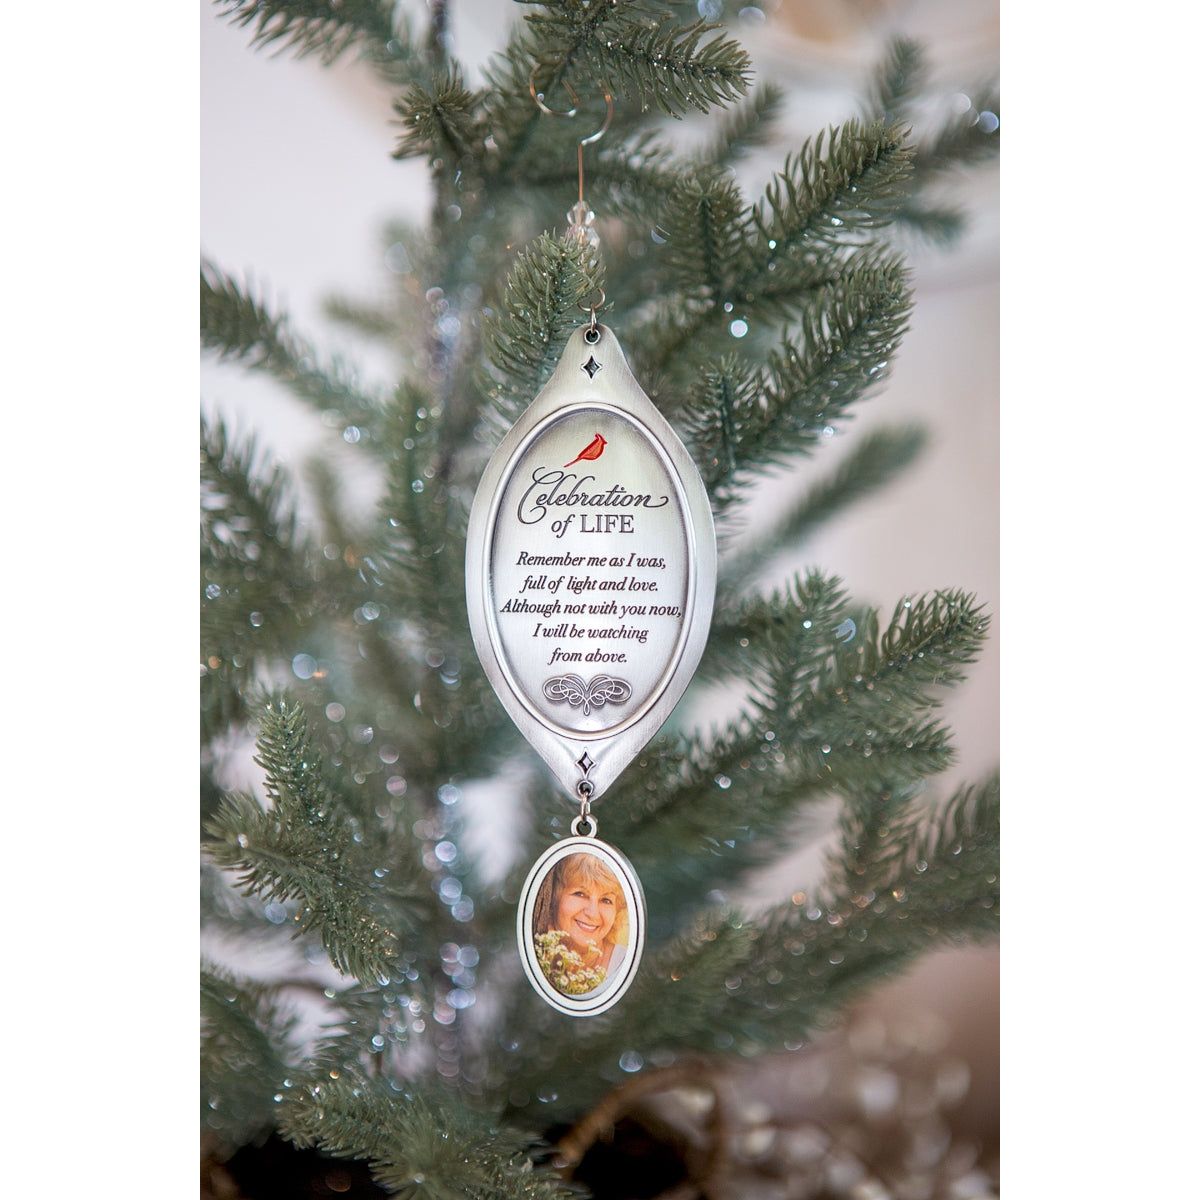 Celebration of Life Ornament hanging from a Christmas tree.